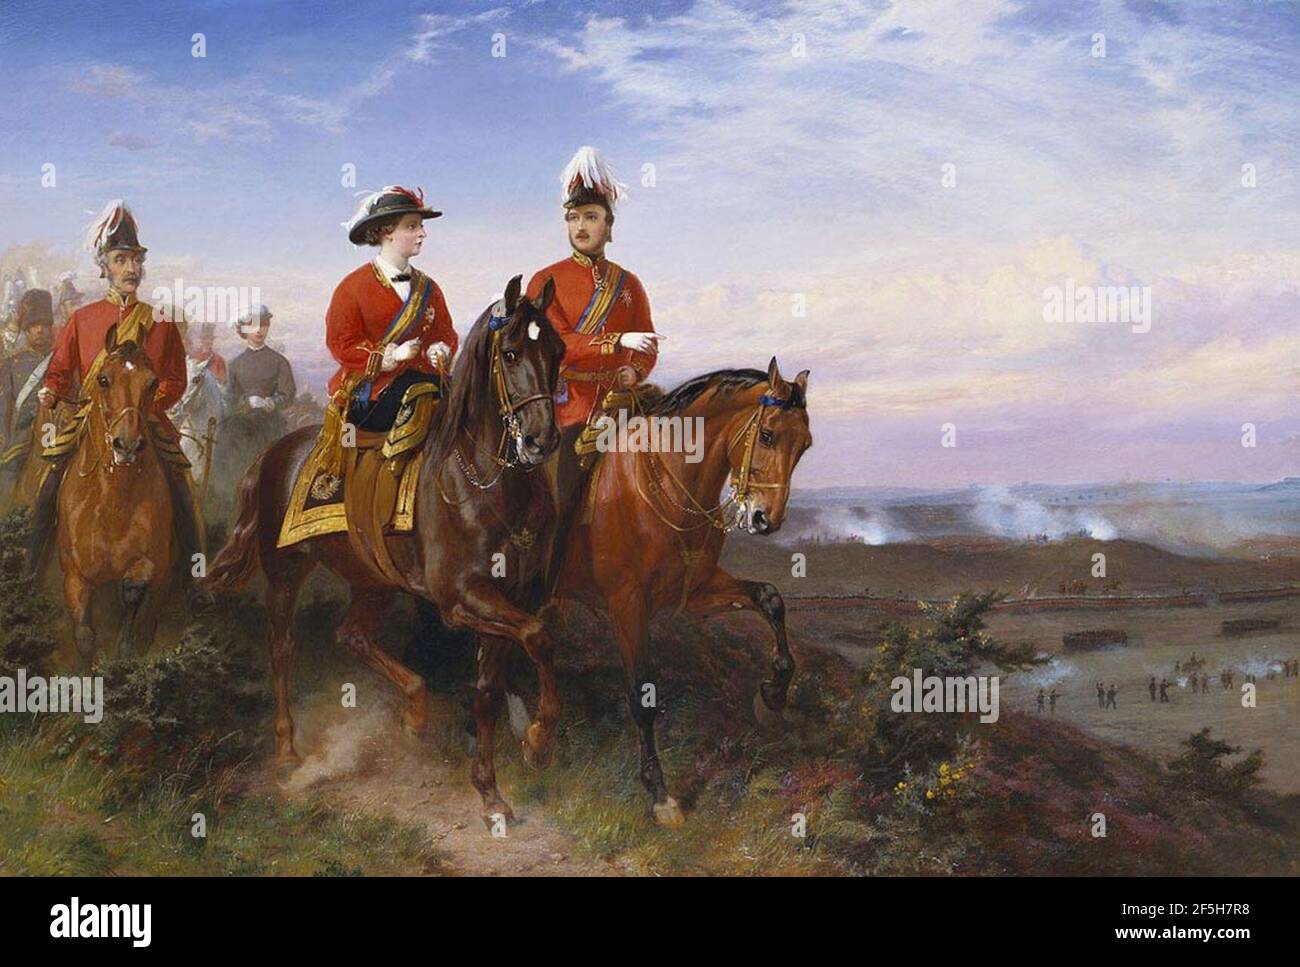 9 july 1859 hi-res photography - images Alamy and stock